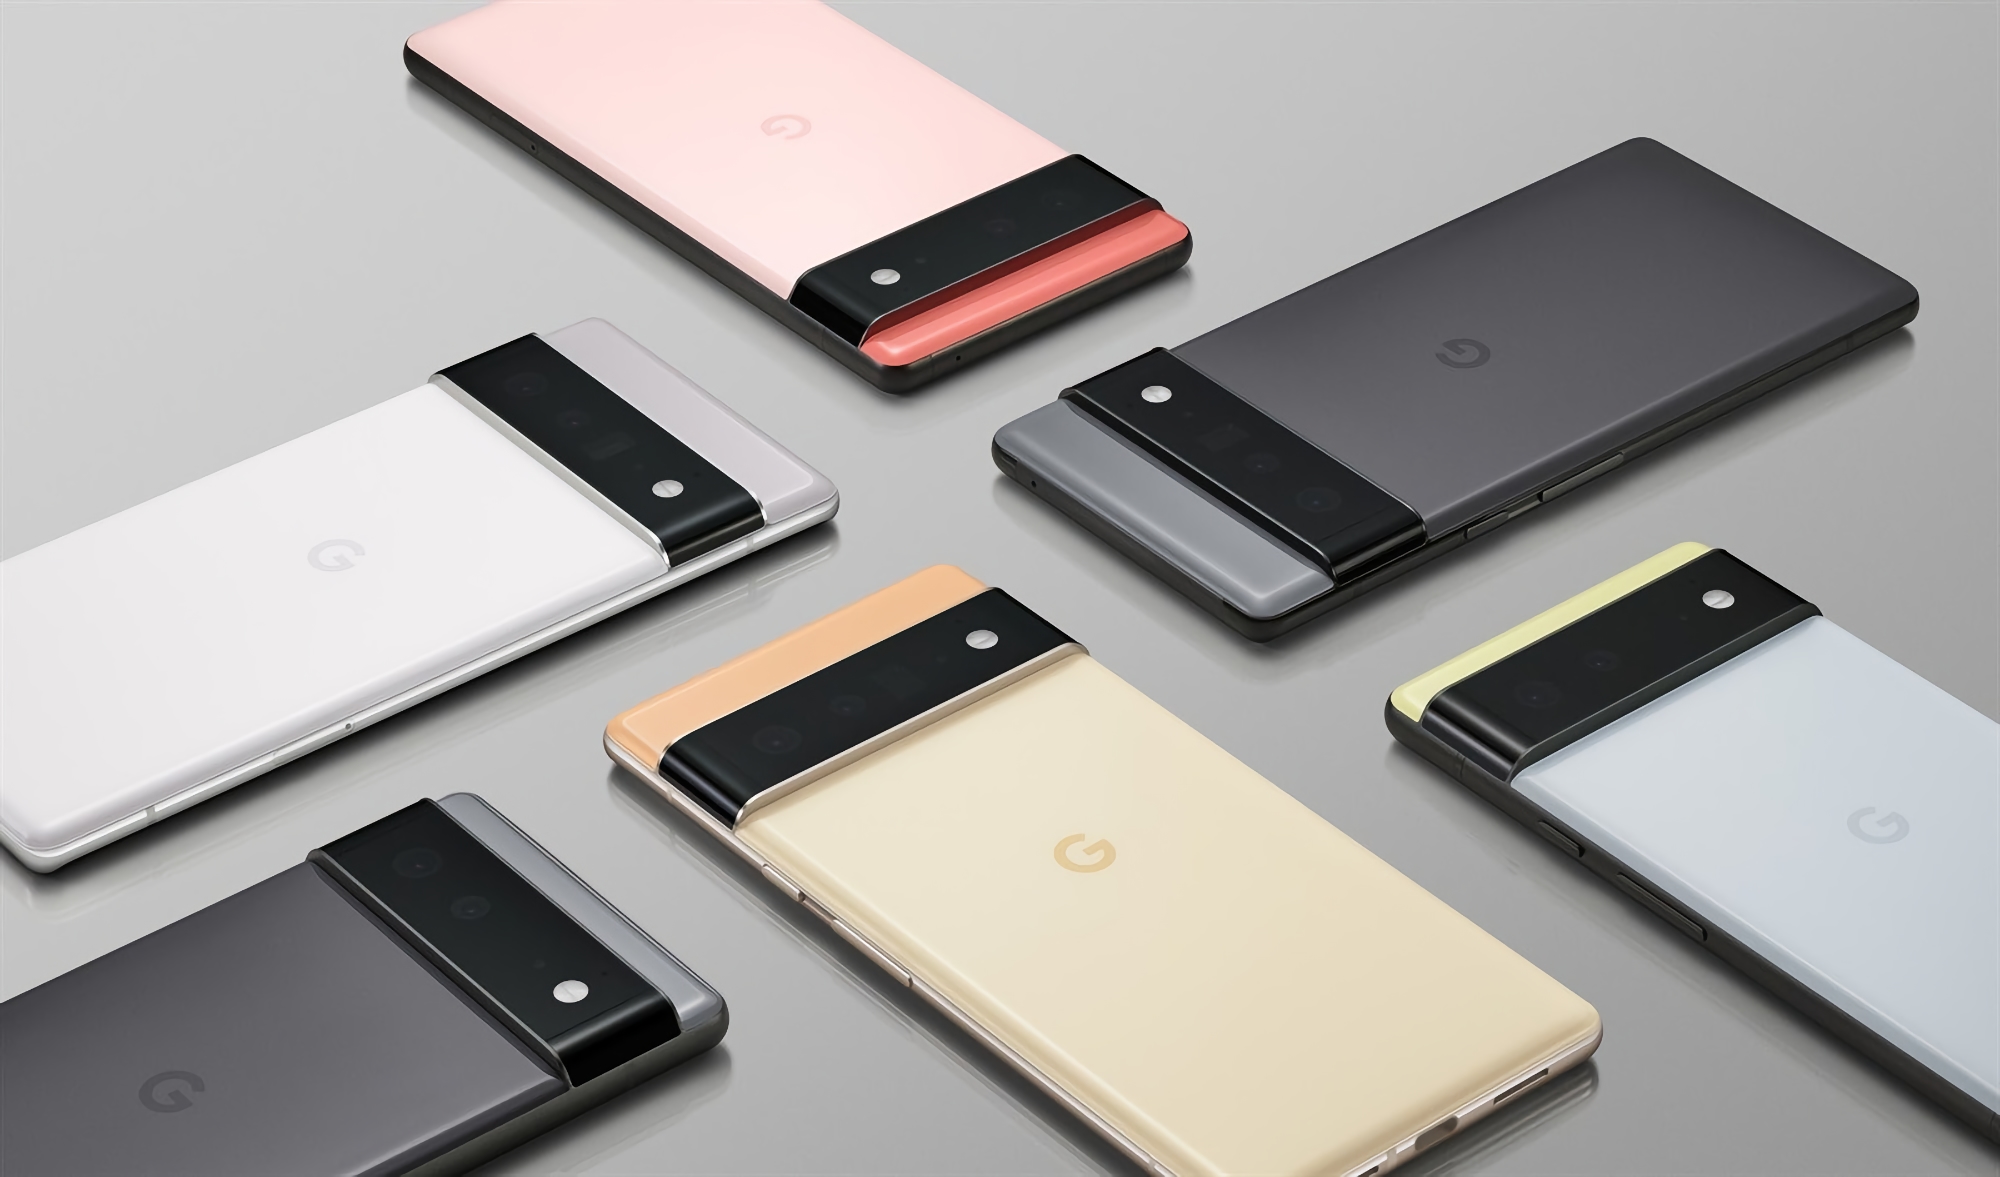 Rumor: Google will unveil Pixel 6 and Pixel 6 Pro a day ahead of iPhone 13